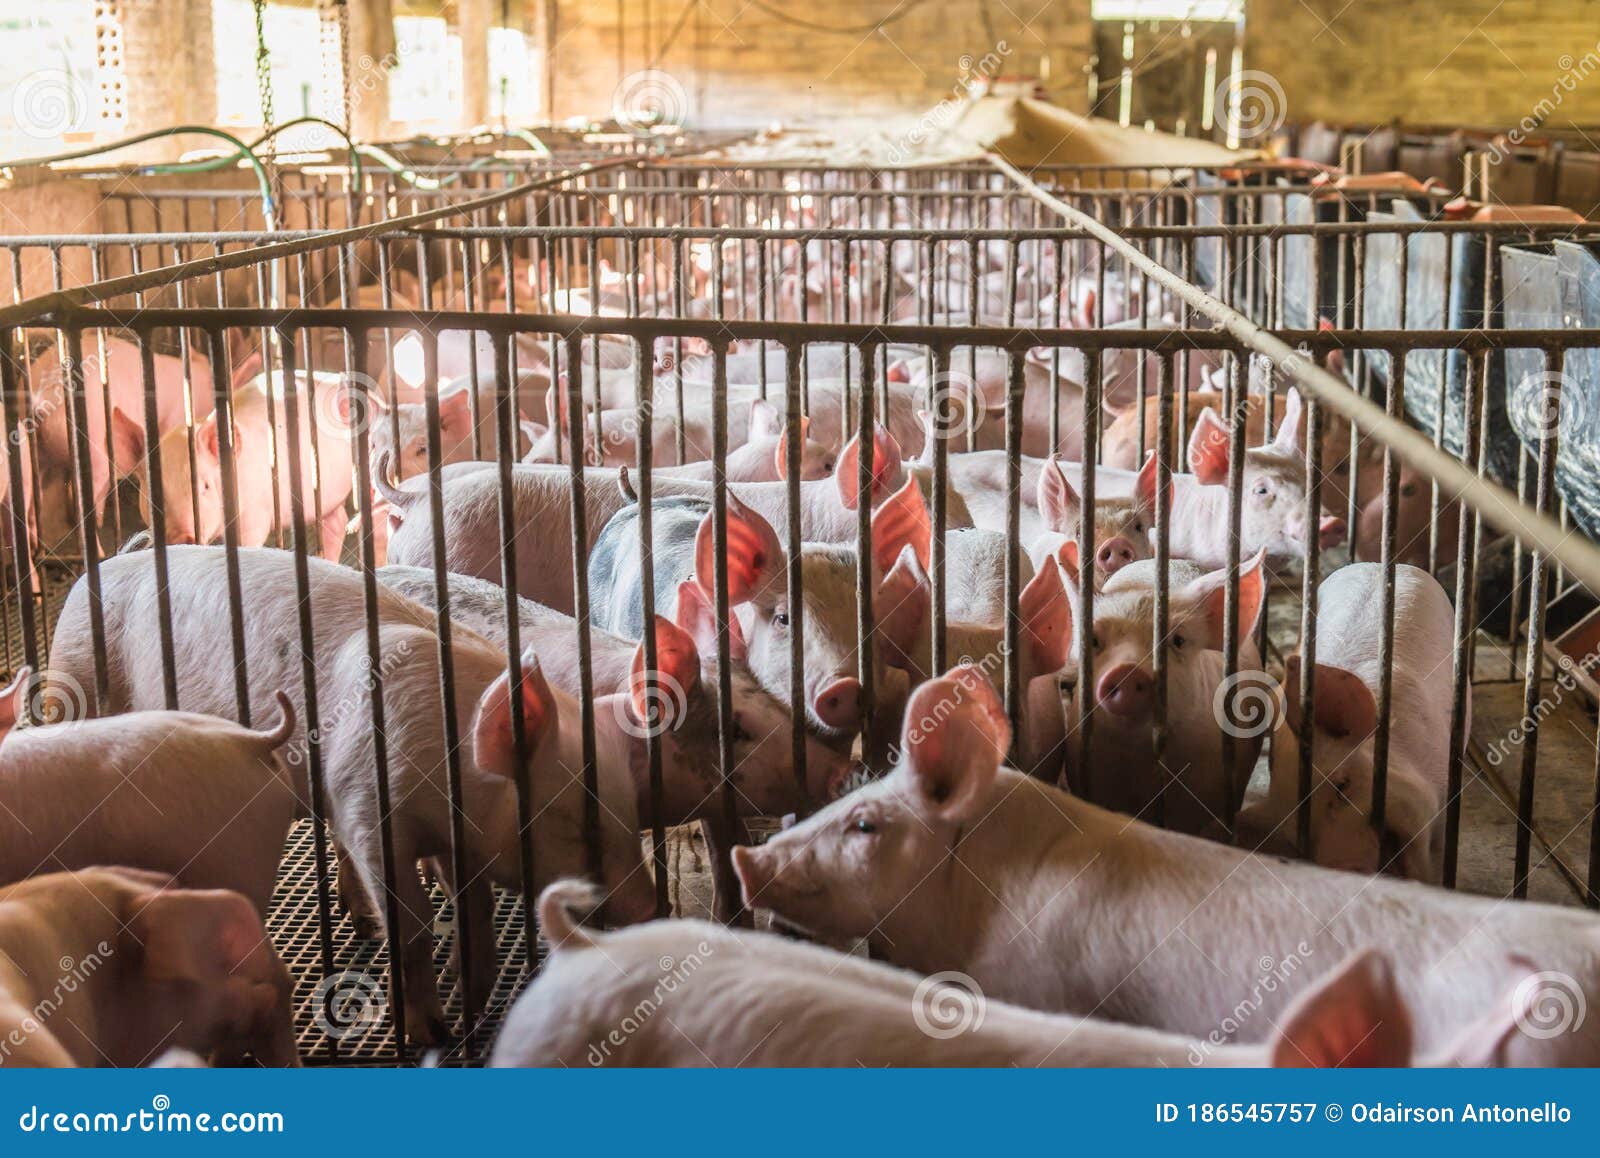 pig farms in confinement mode.